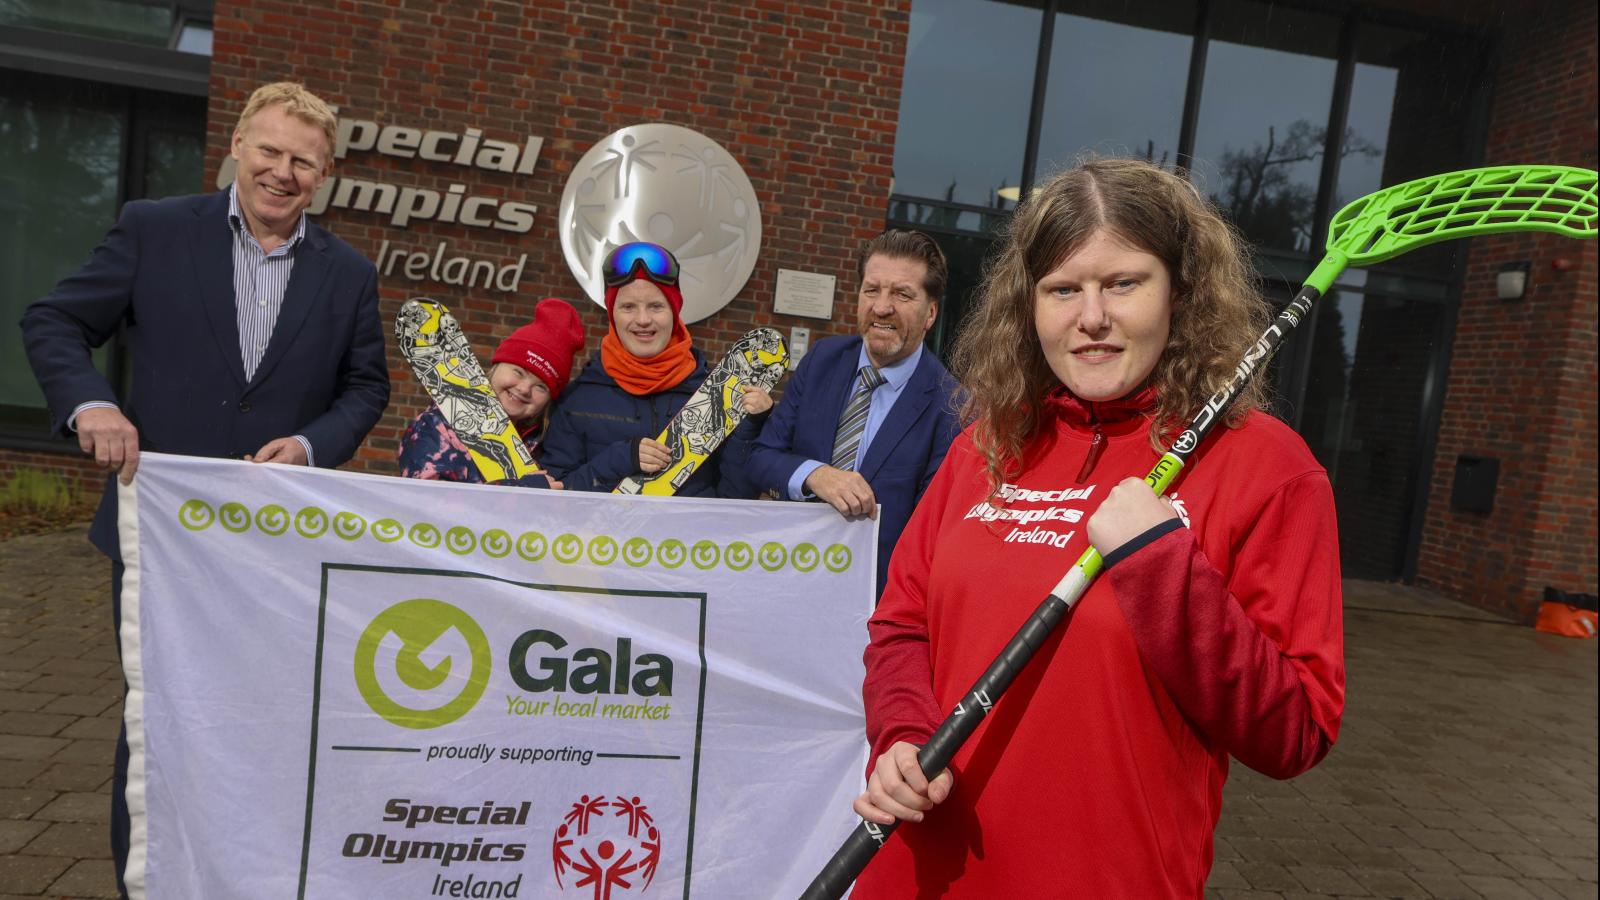 Pic 2 - Gala Retail and Special Olympics Ireland.jpg